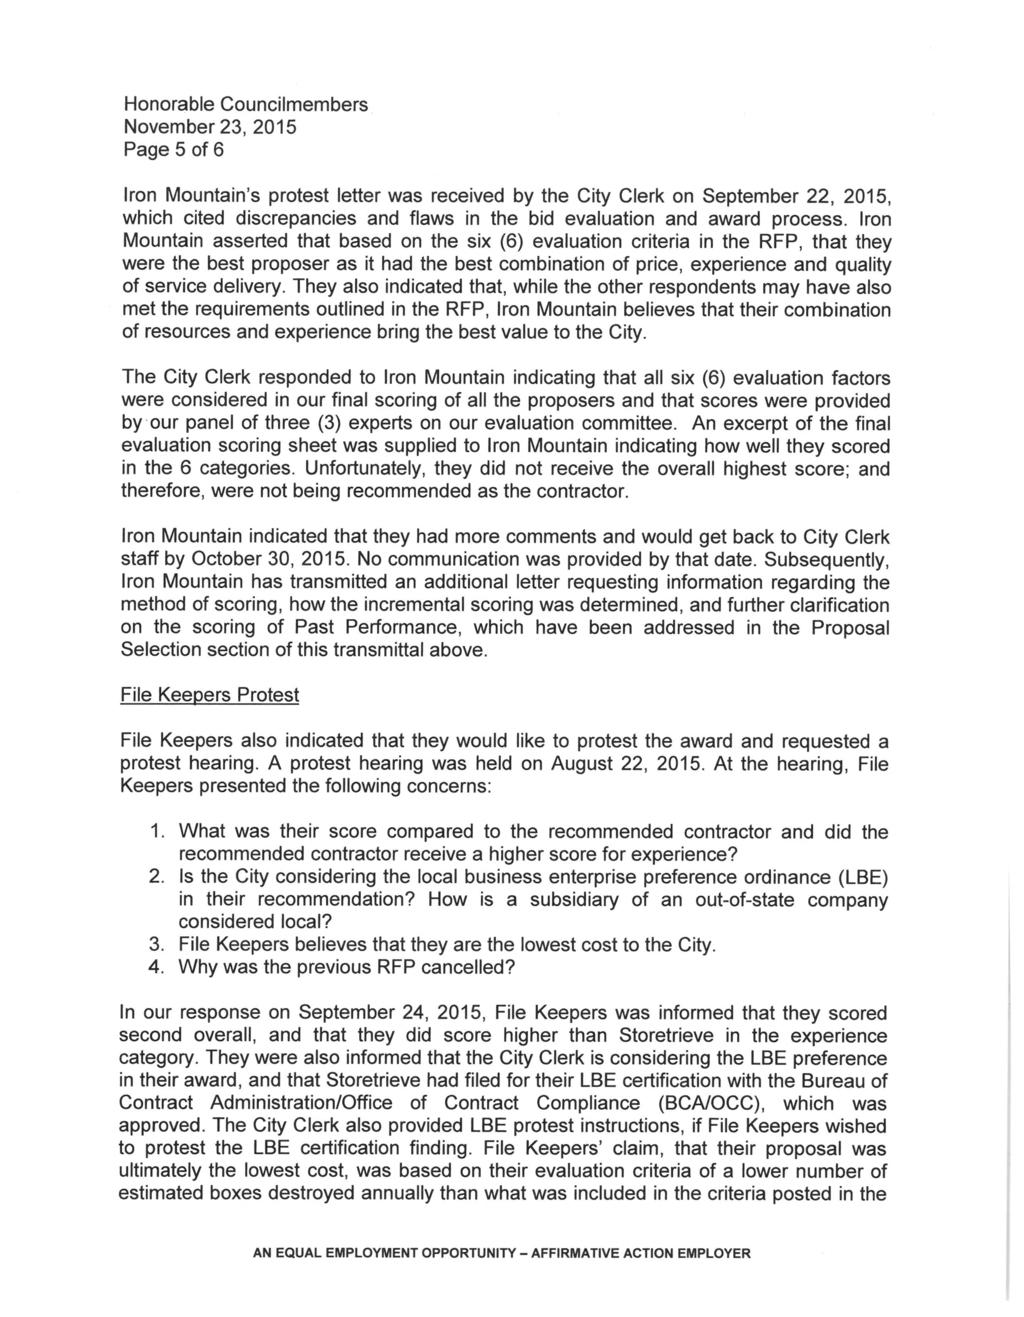 Page 5 of 6 Iron Mountain s protest letter was received by the City Clerk on September 22, 2015, which cited discrepancies and flaws in the bid evaluation and award process.